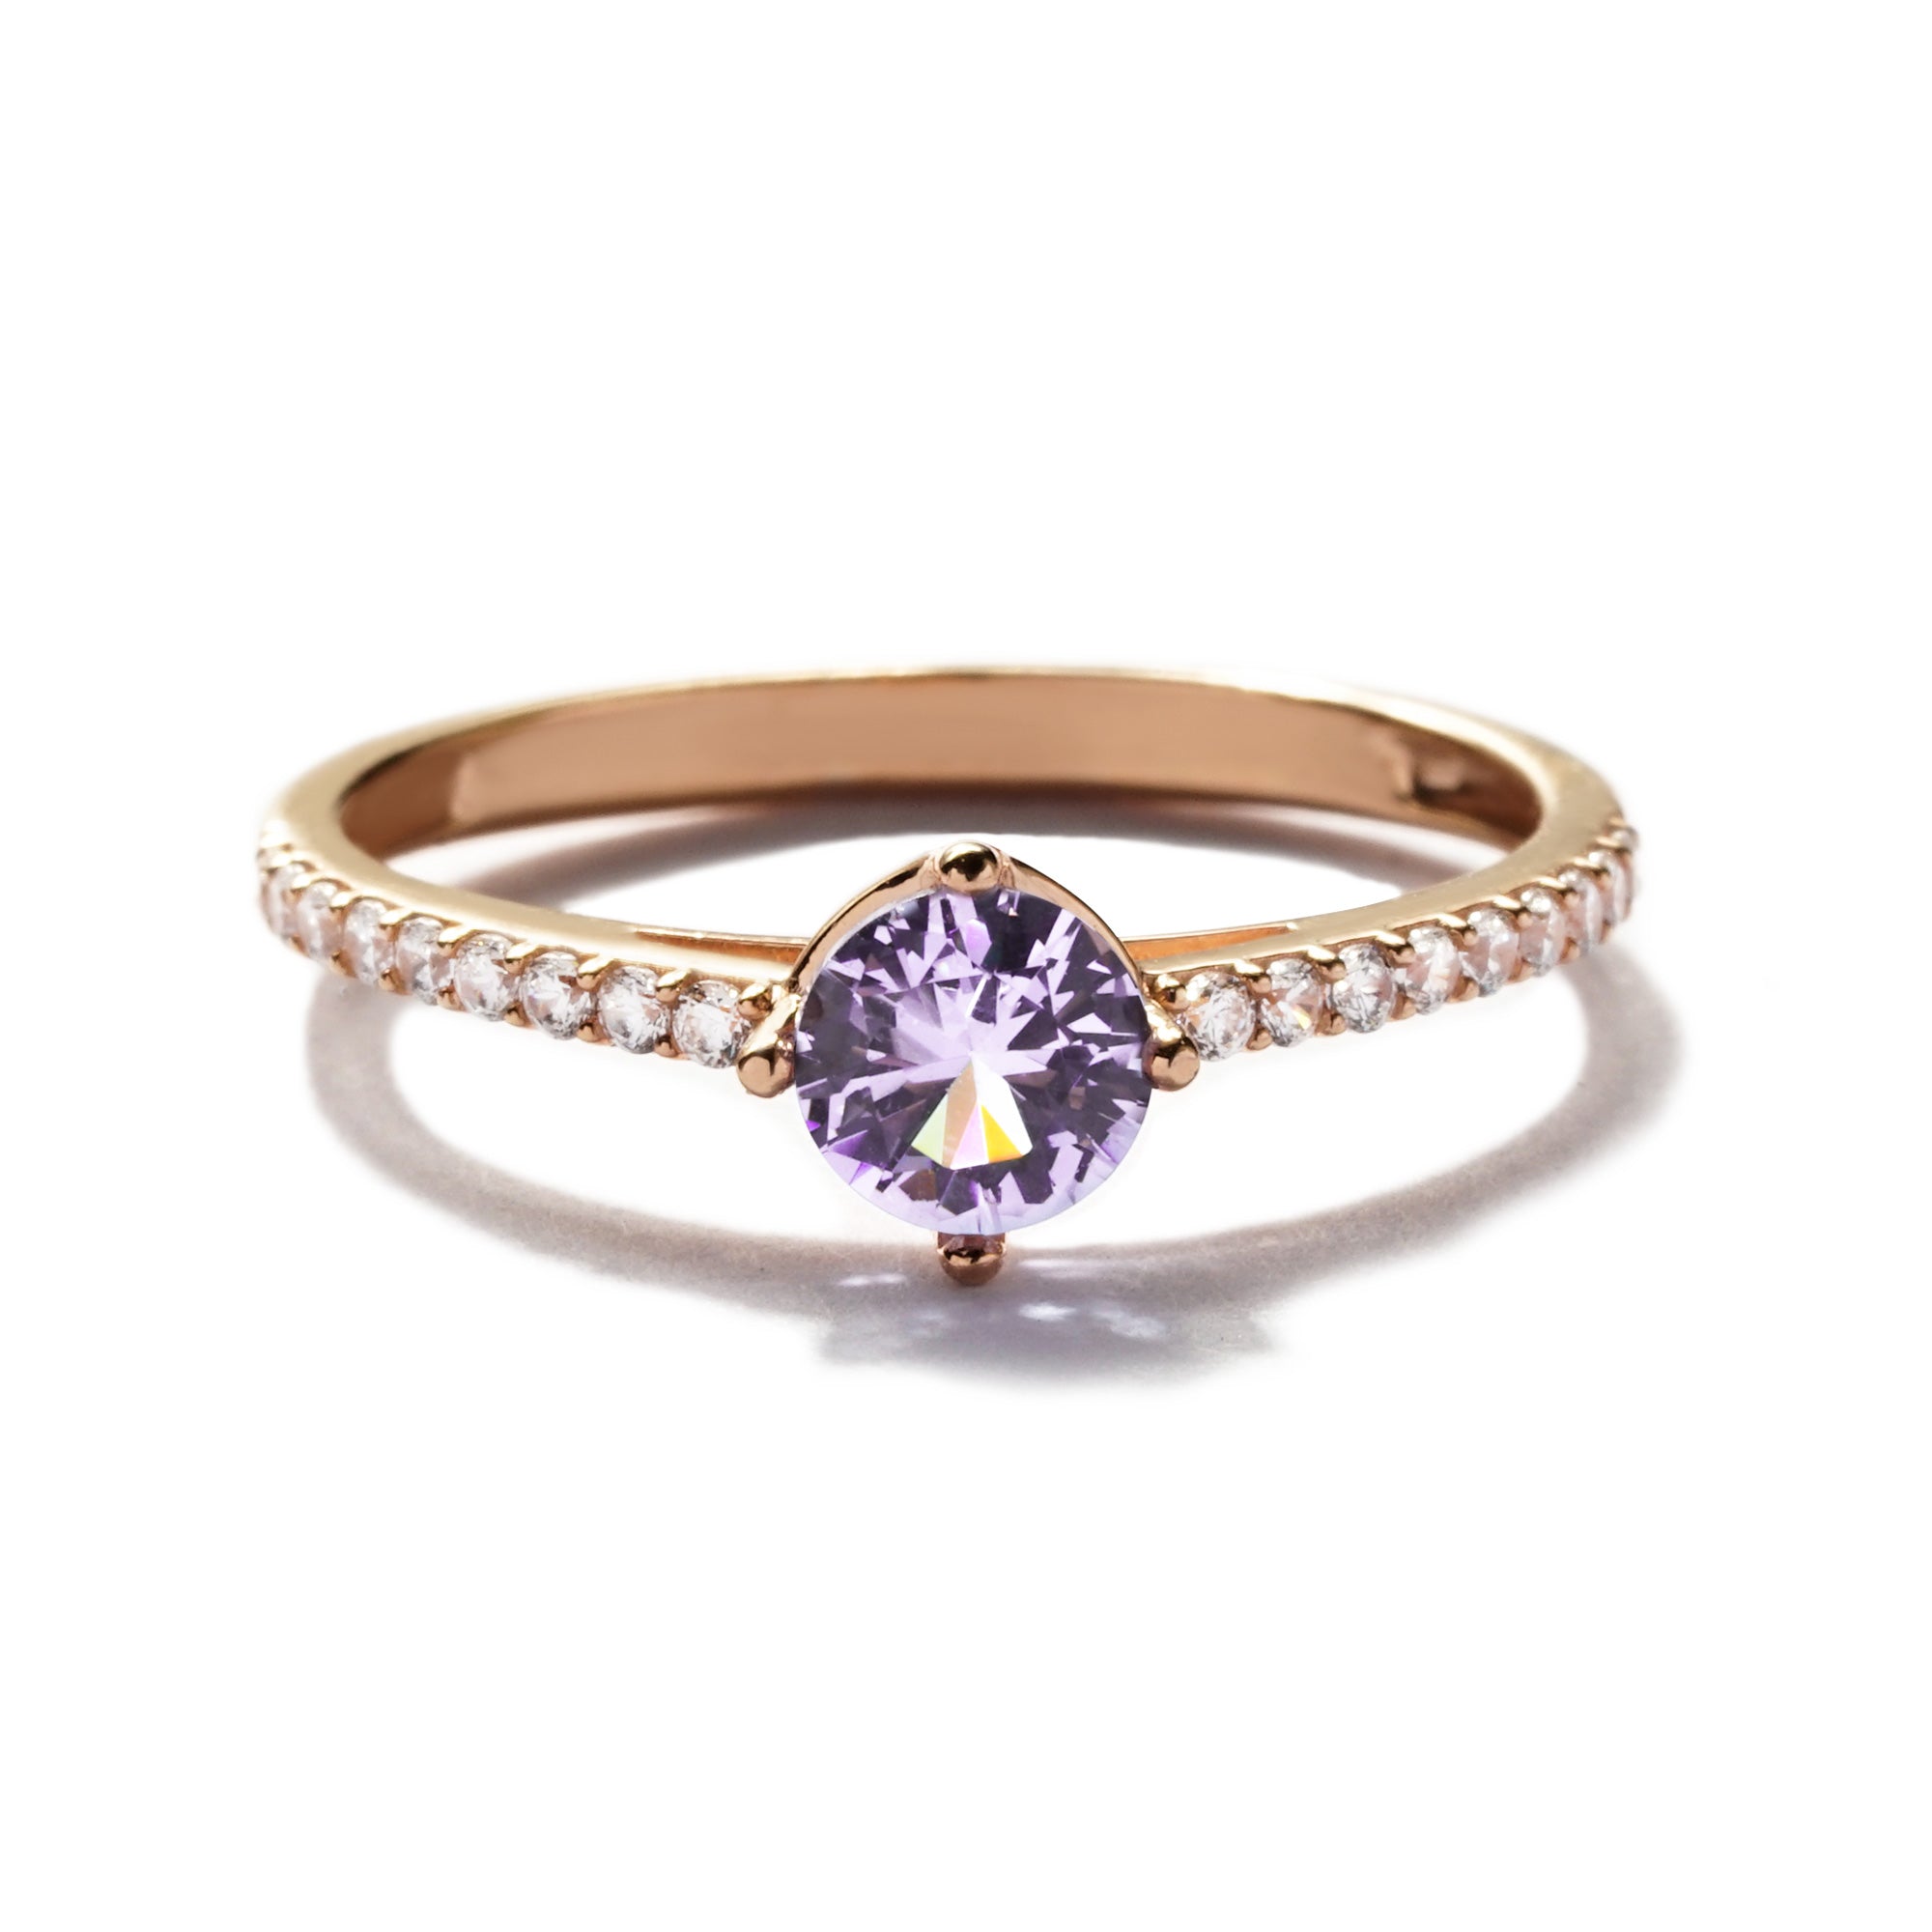 Tiana Gold Ring - Violet - Juene Jewelry